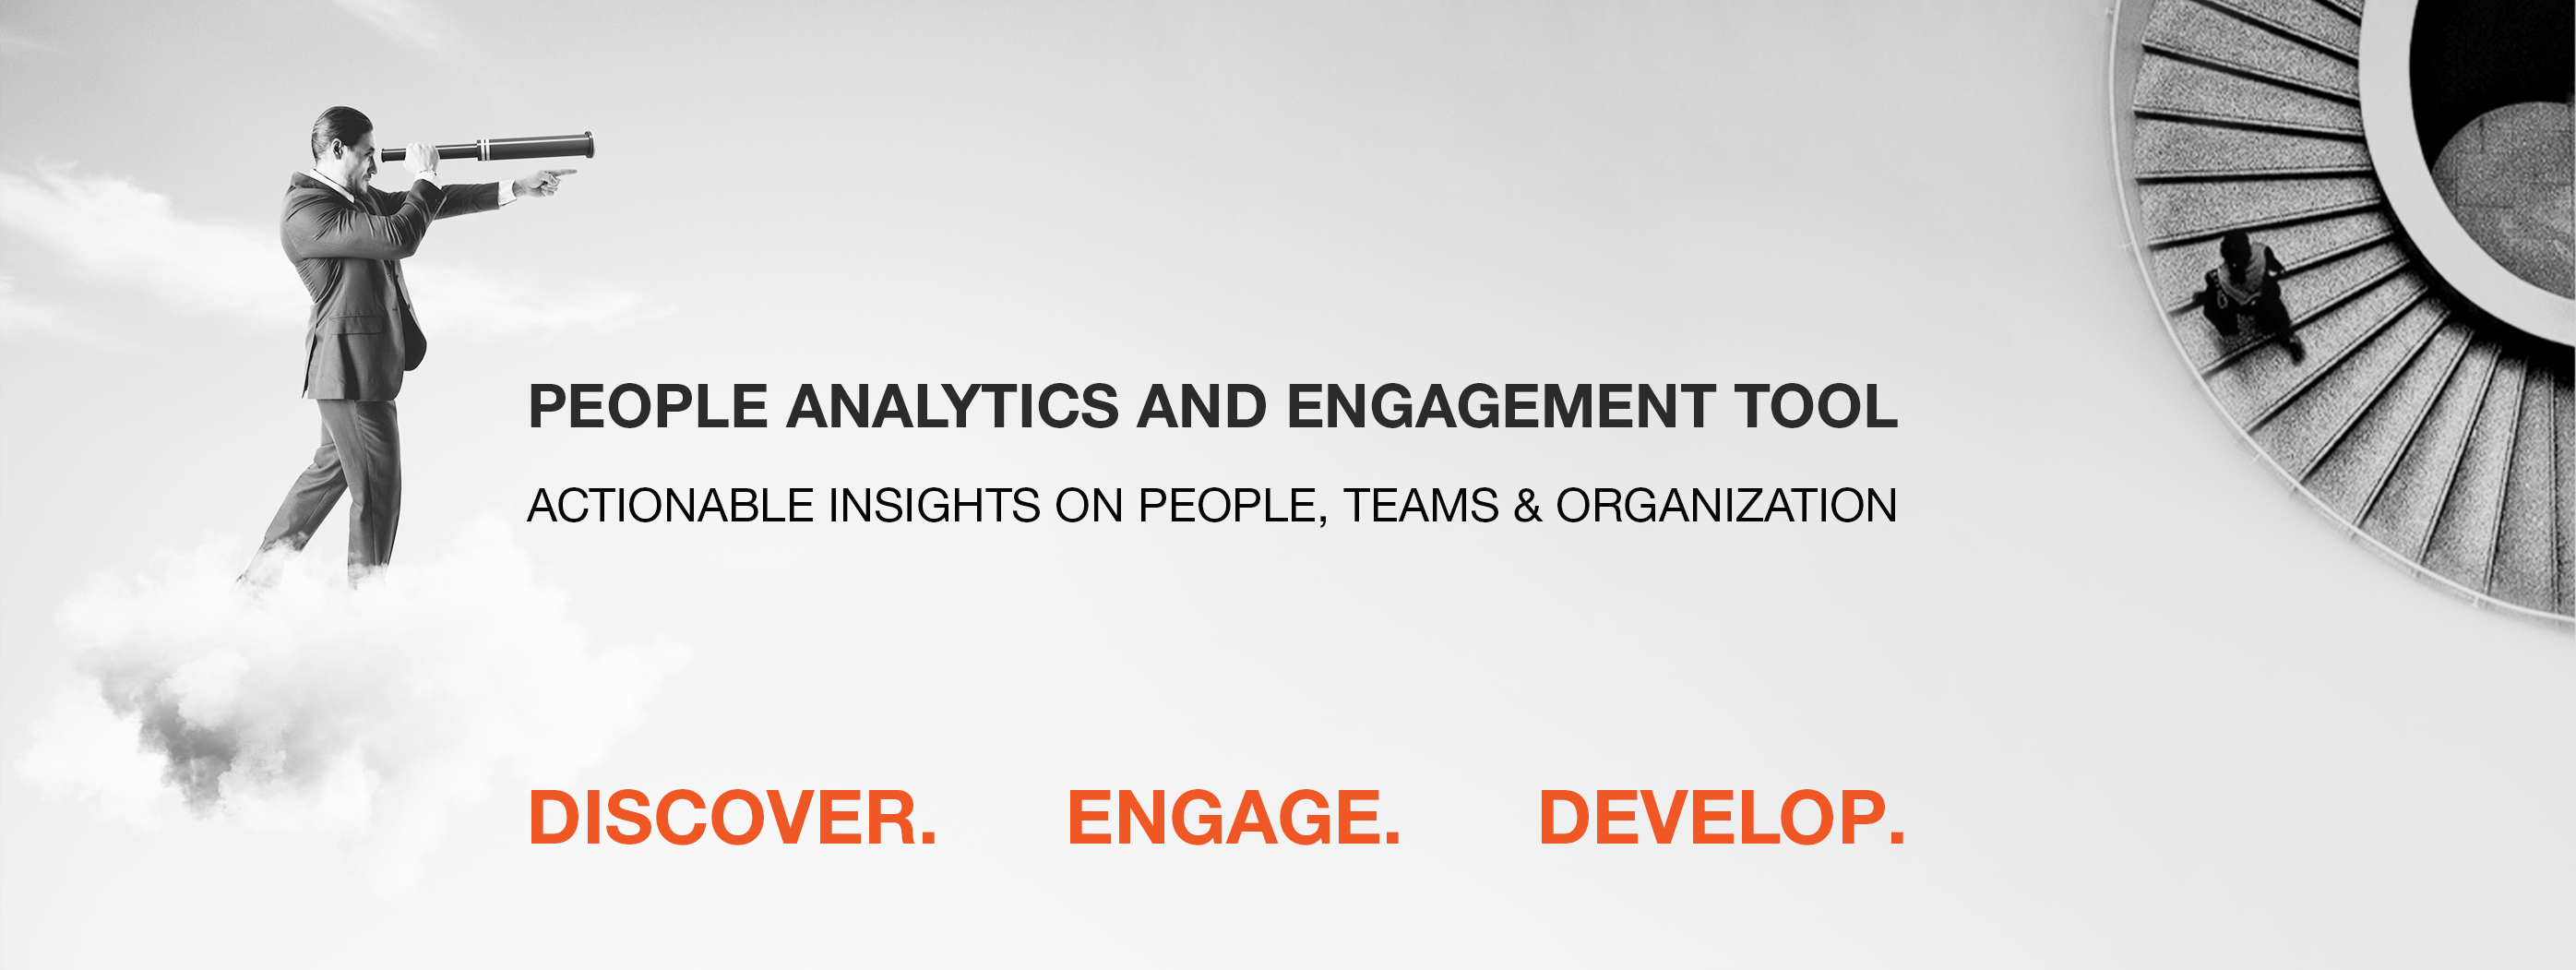 People Analytics and Engagement Tool